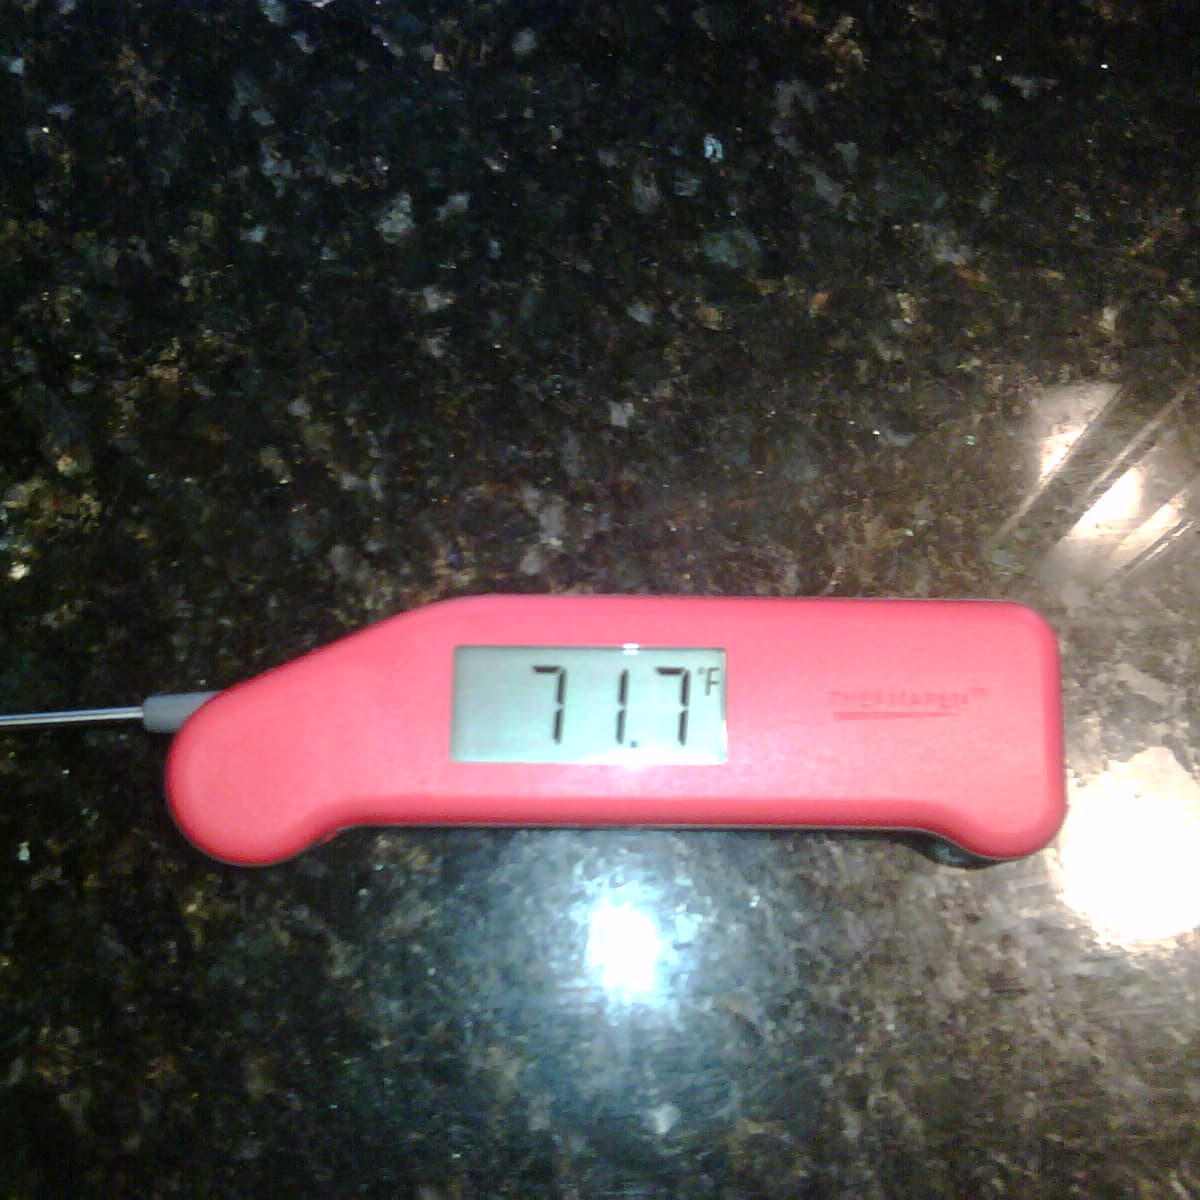 https://images.saymedia-content.com/.image/ar_1:1%2Cc_fill%2Ccs_srgb%2Cfl_progressive%2Cq_auto:eco%2Cw_1200/MTczOTY0ODkzNDkyNDg4MDU5/the-best-instant-read-thermometer.jpg